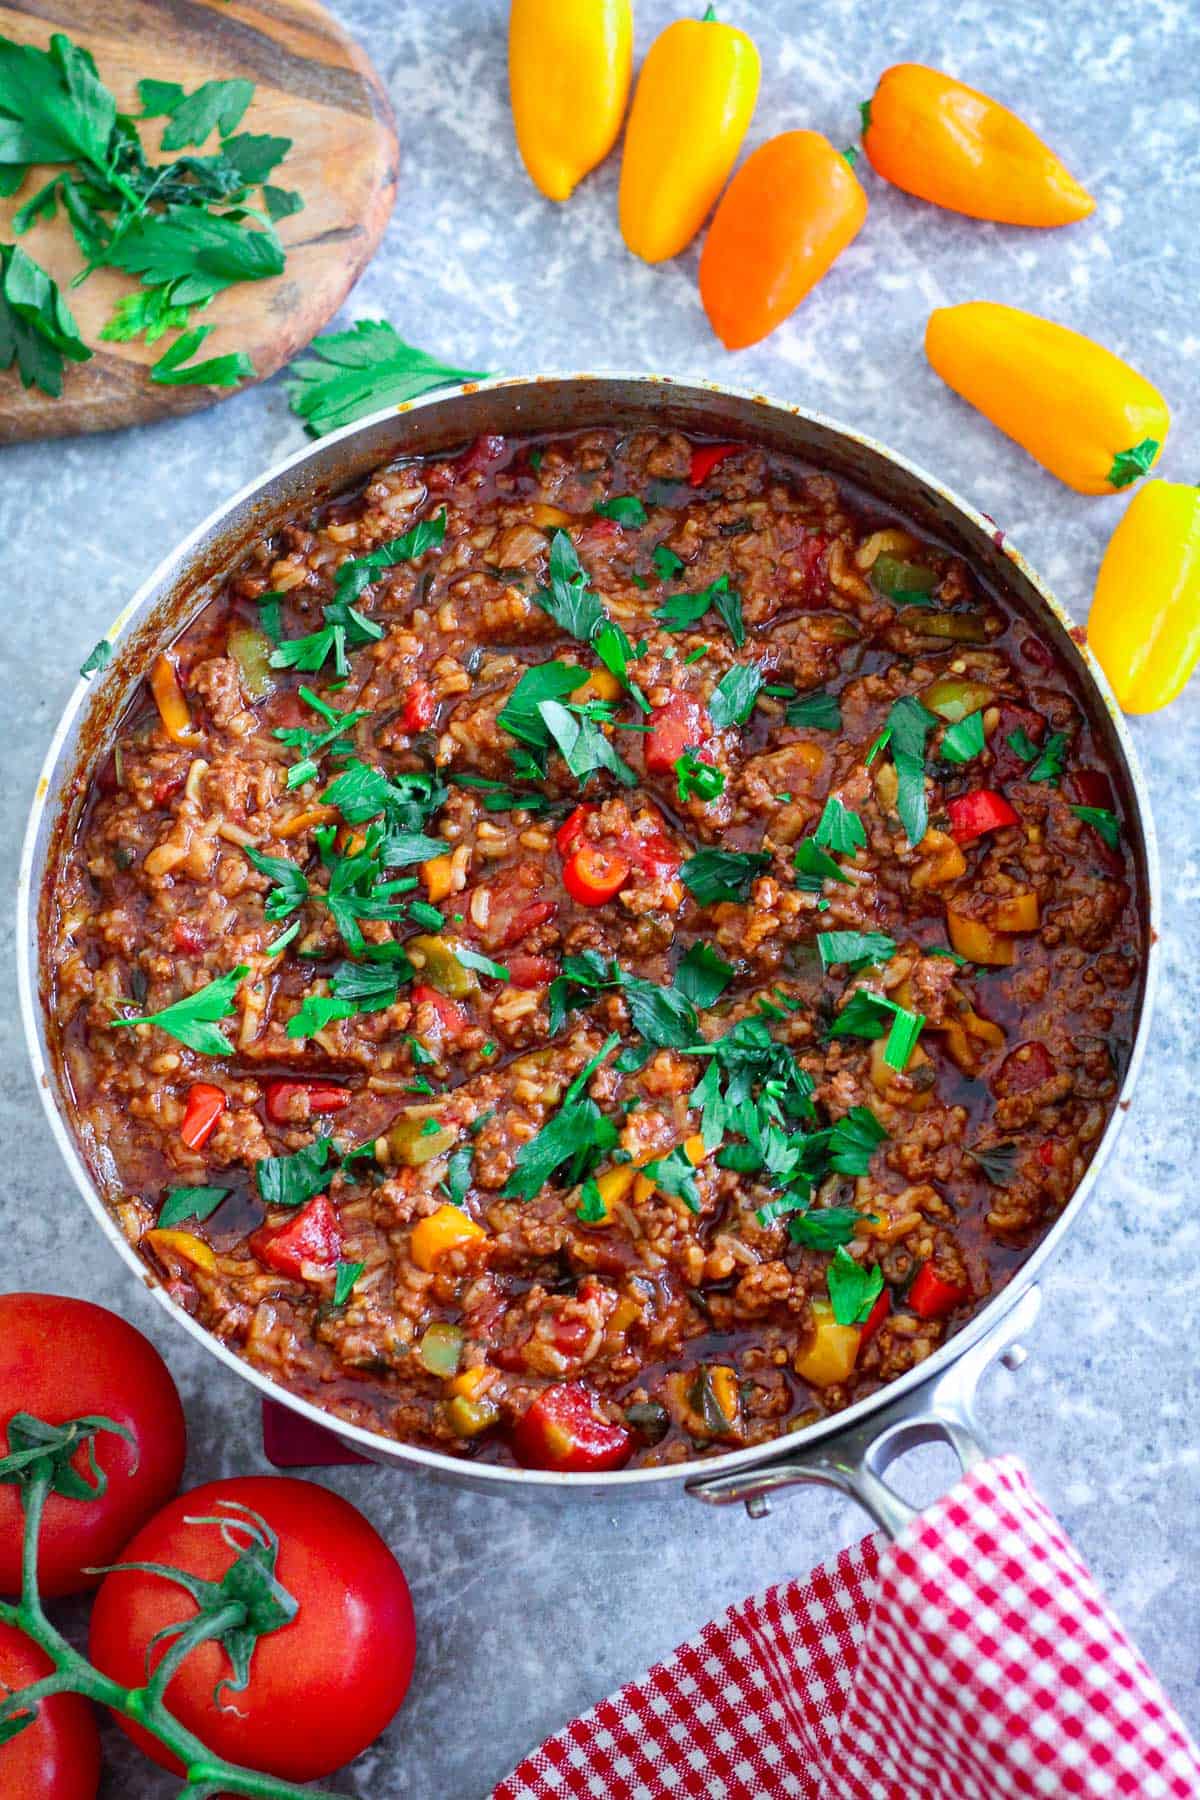 A skillet with ground beef, peppers, tomatoes and lots of seasonings and herbs shown in the middle. There's peppers, tomatoes, and parsley around the skillet.